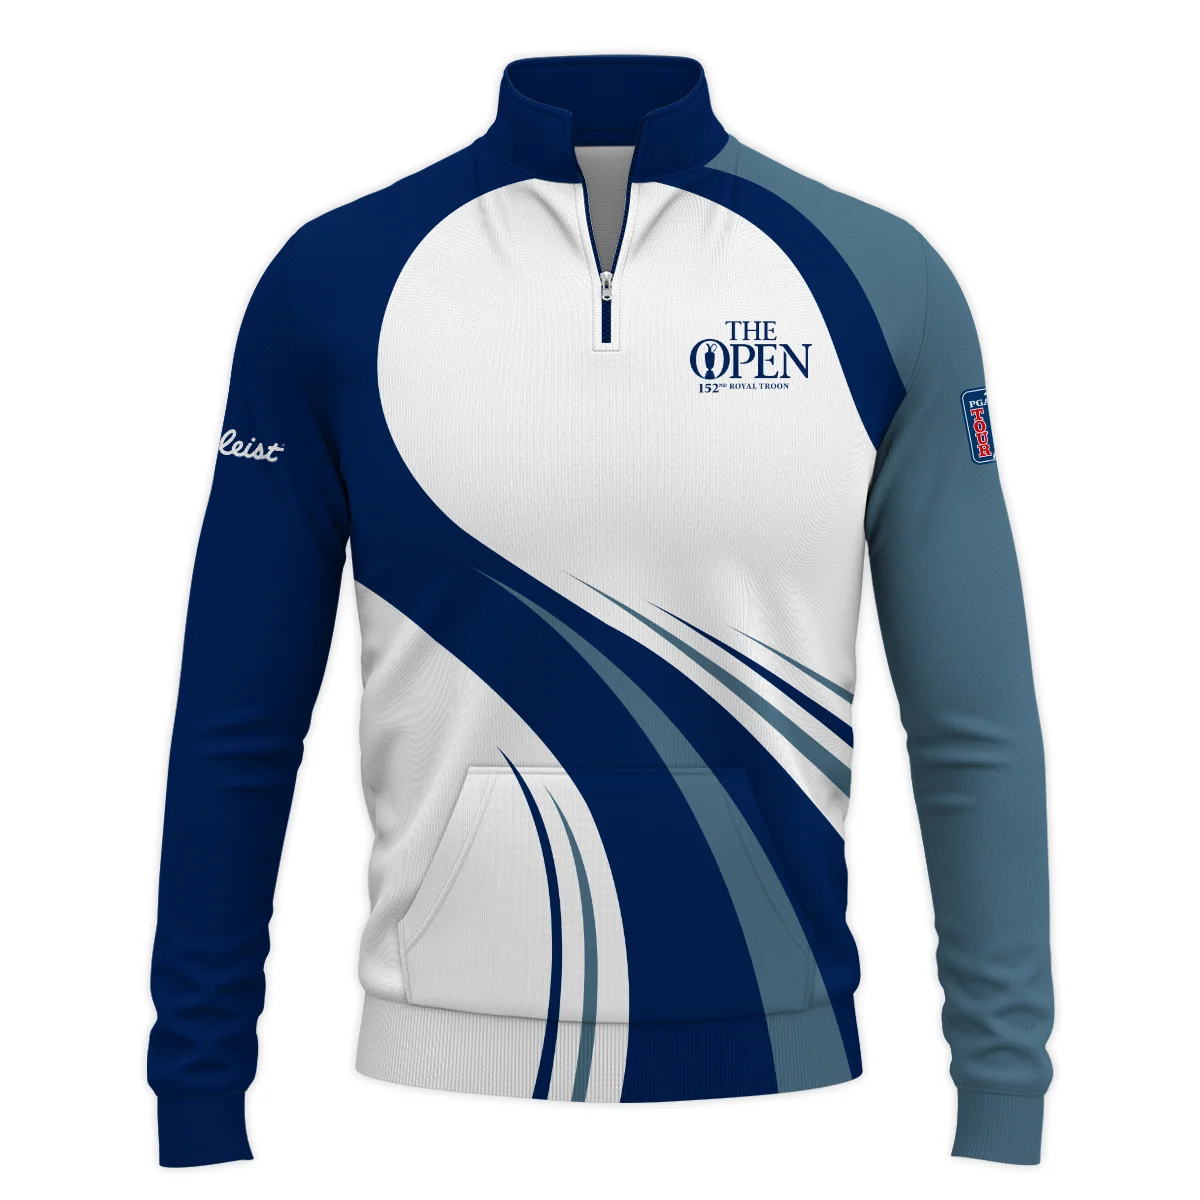 152nd Open Championship Titleist White Mostly Desaturated Dark Blue Hoodie Shirt All Over Prints HOTOP270624A02TLHD